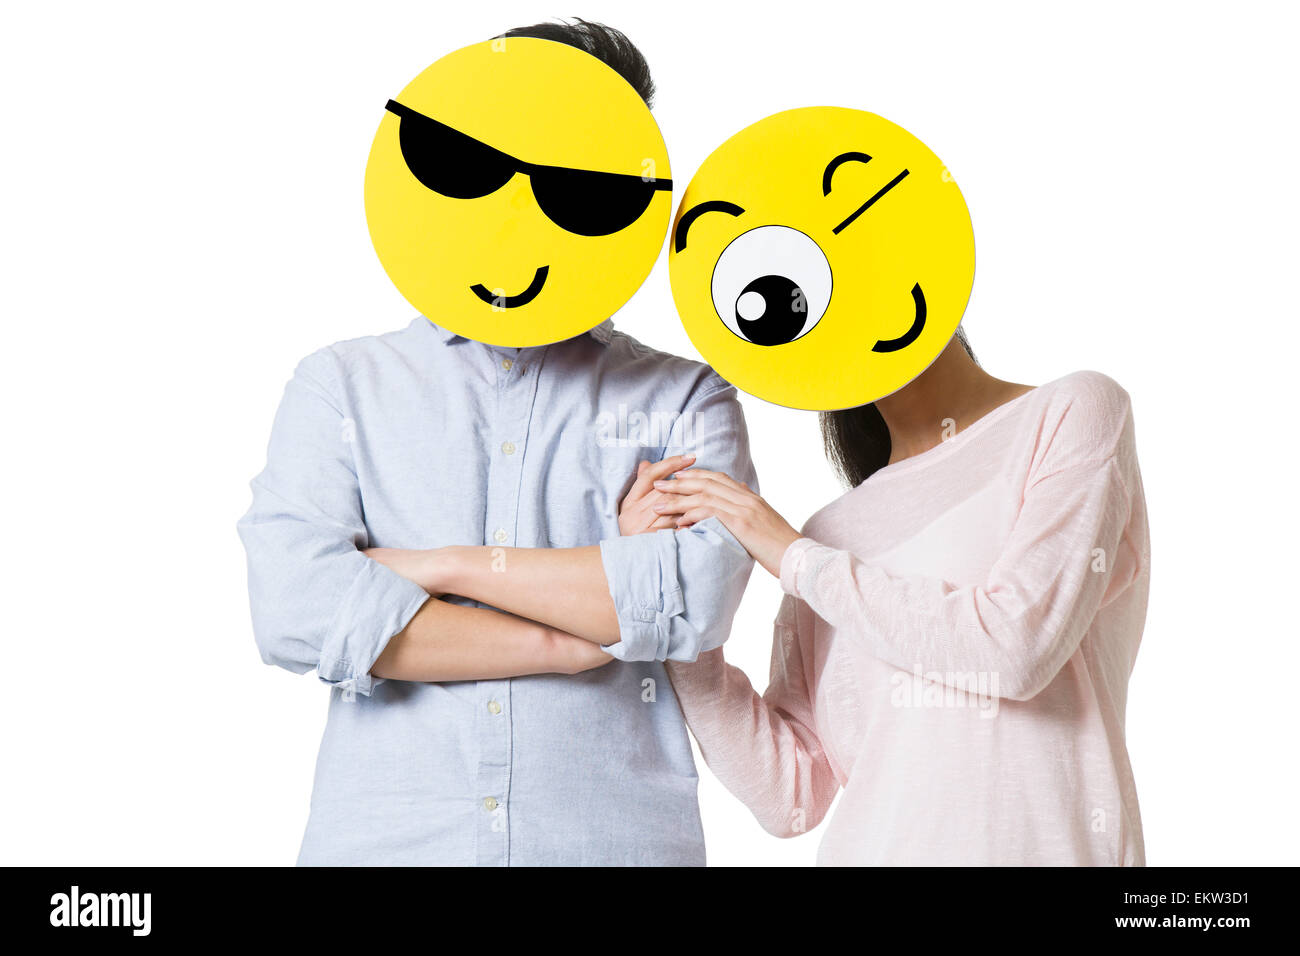 Young couple with cartoon emoticon faces in front of their faces Stock Photo